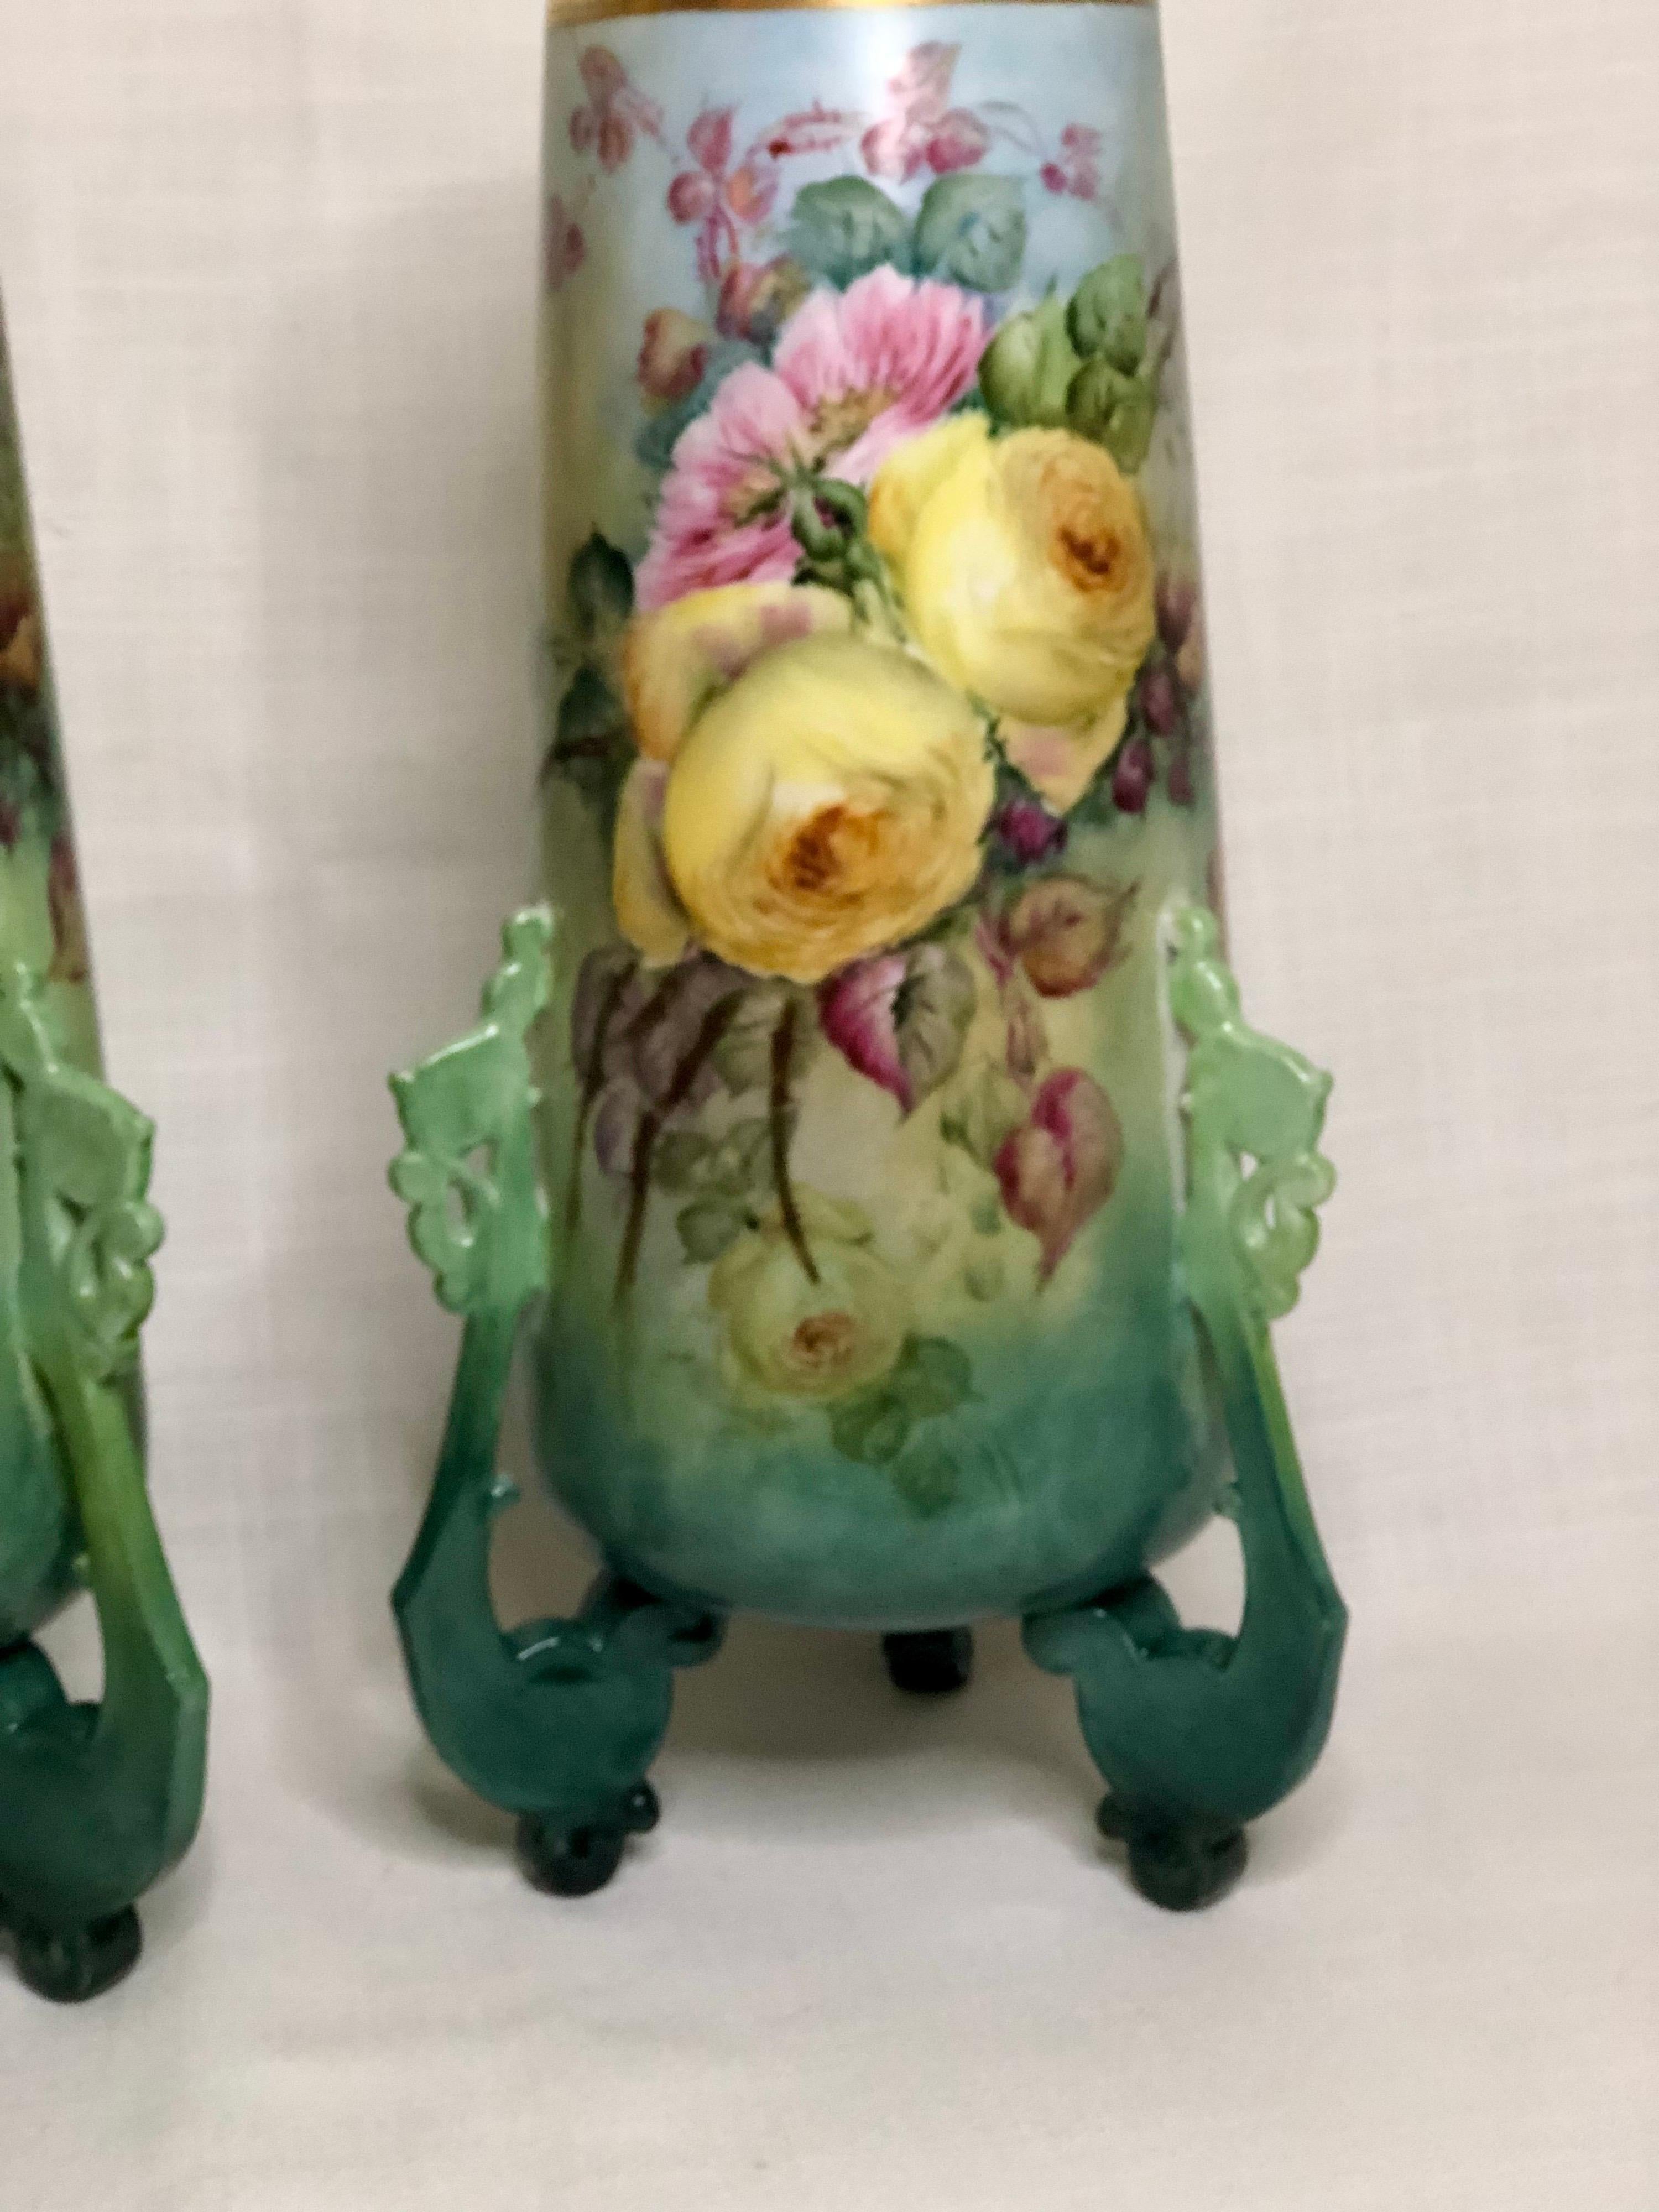 Early 20th Century Pair of Large William Guerin Limoges Hand Painted Vases with Roses and Peonies